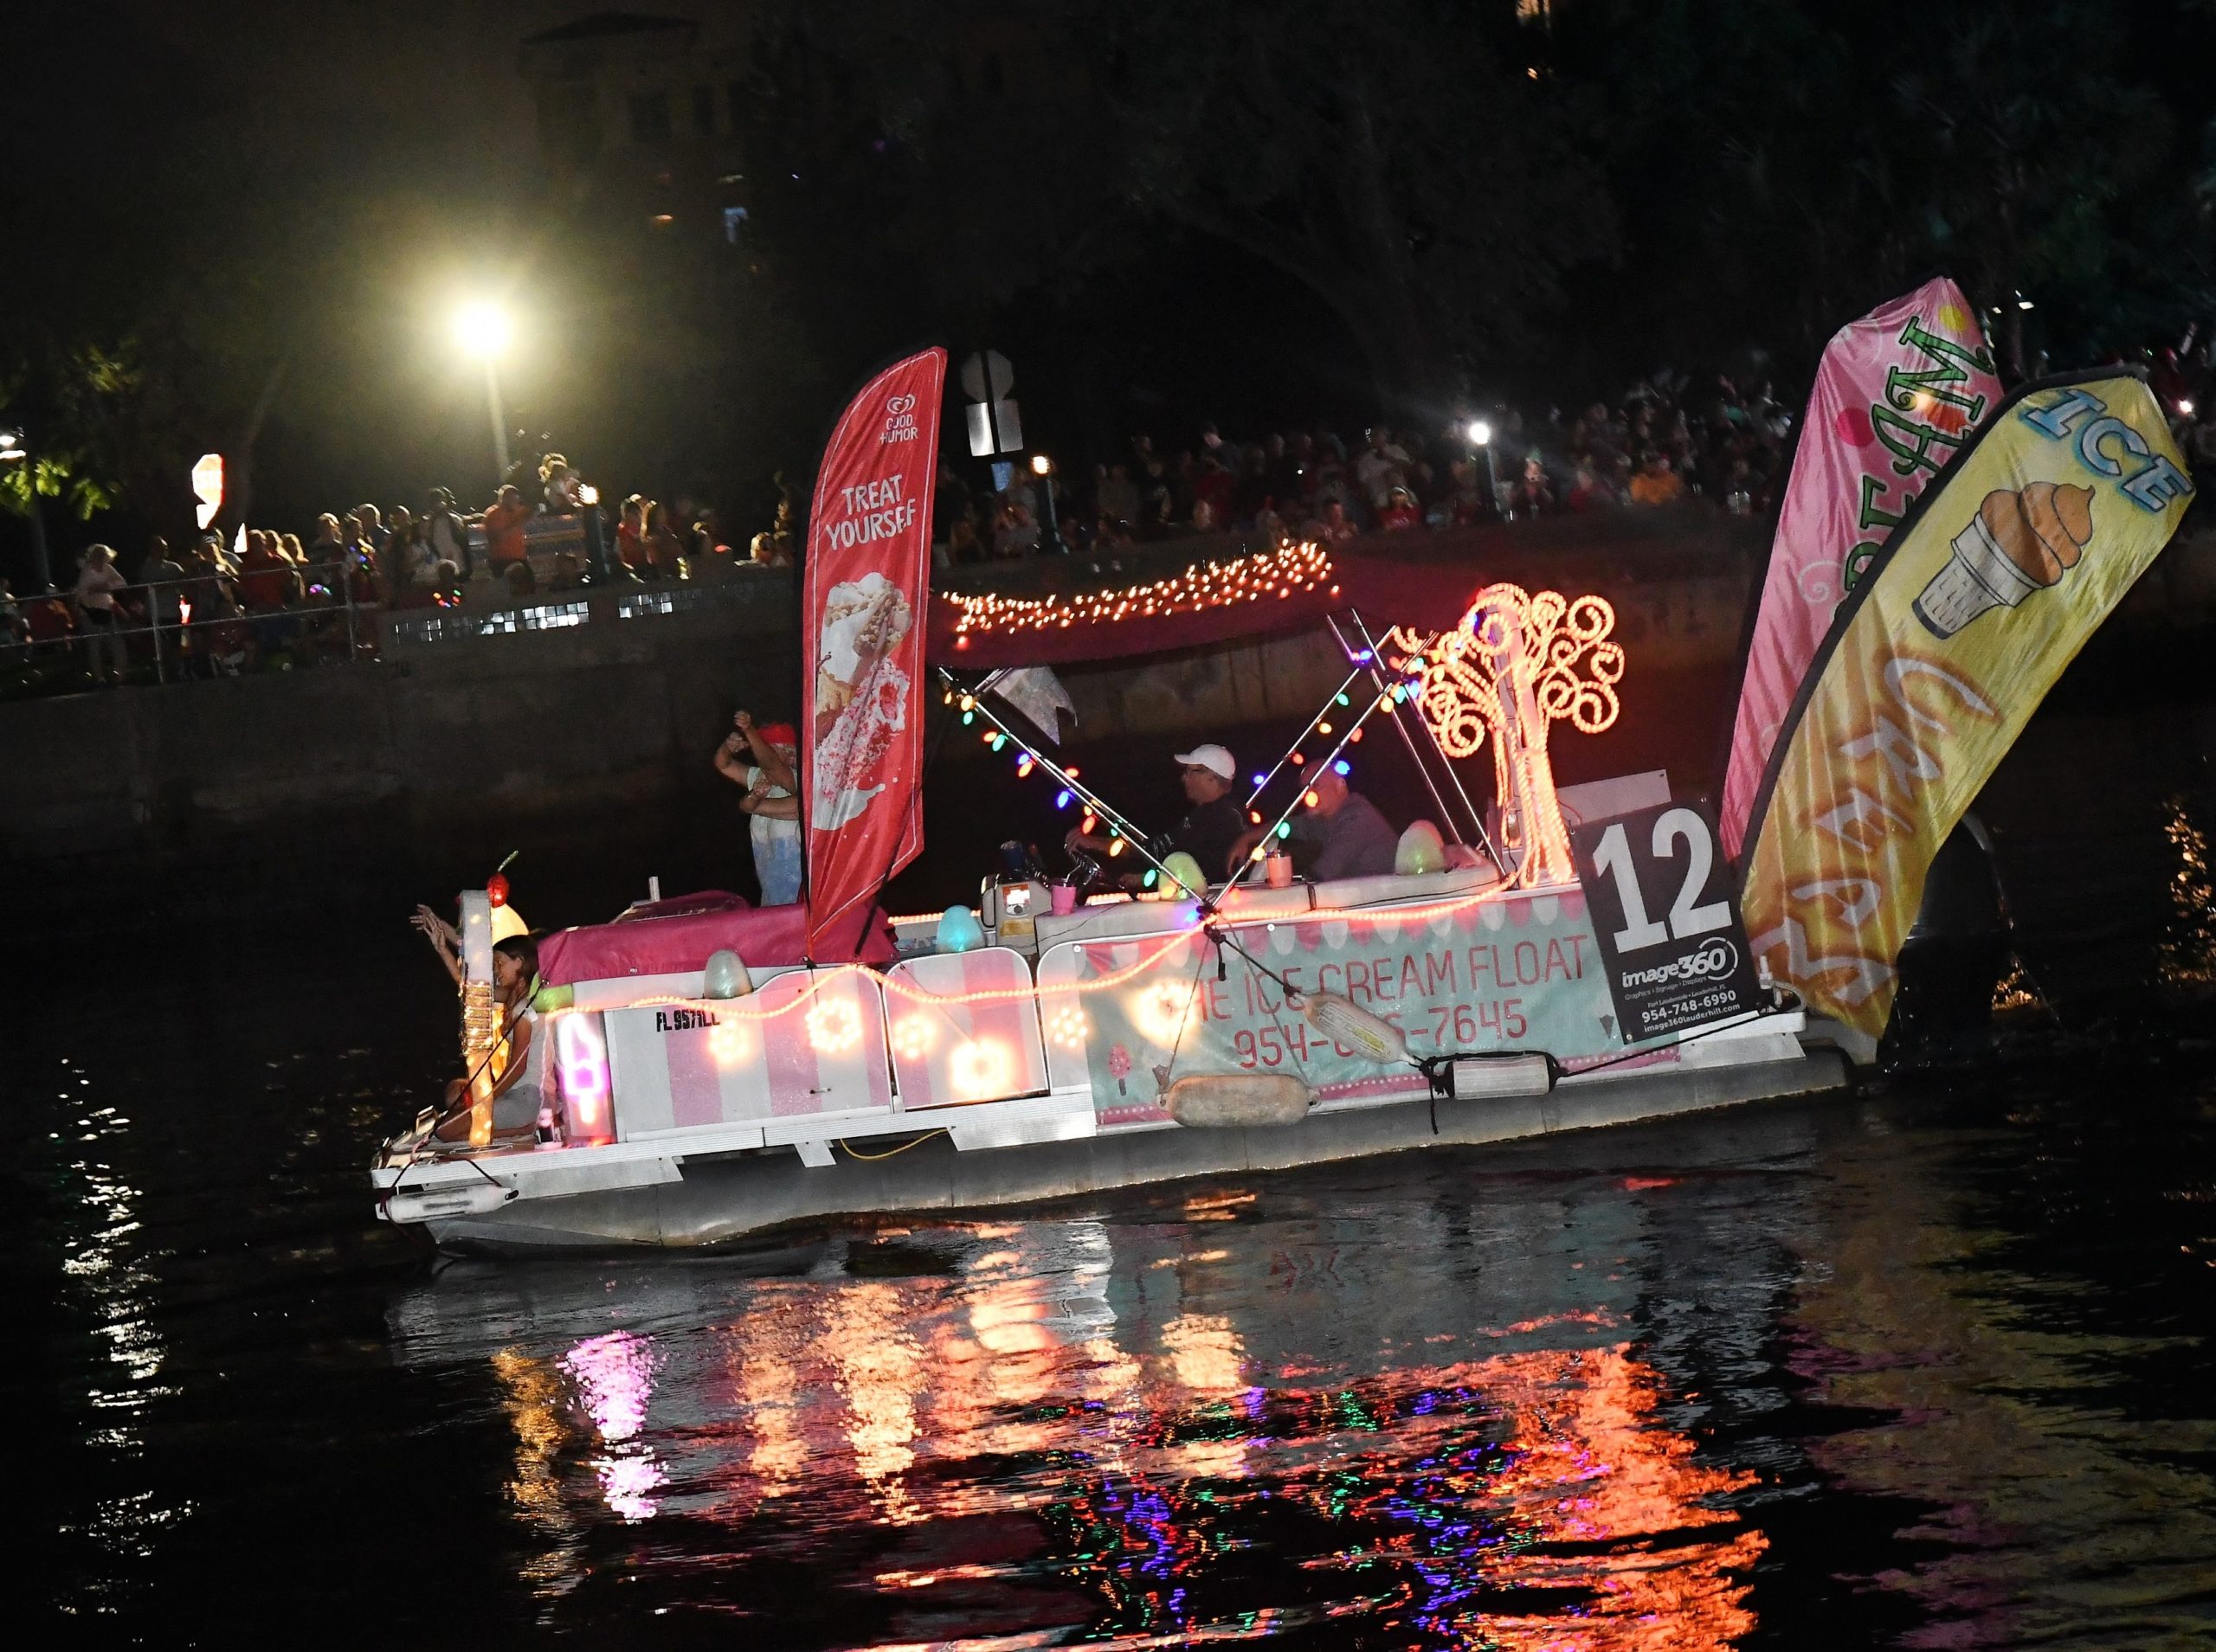 The Ice Cream Float, boat number 12 in the 2021 Winterfest Boat Parade